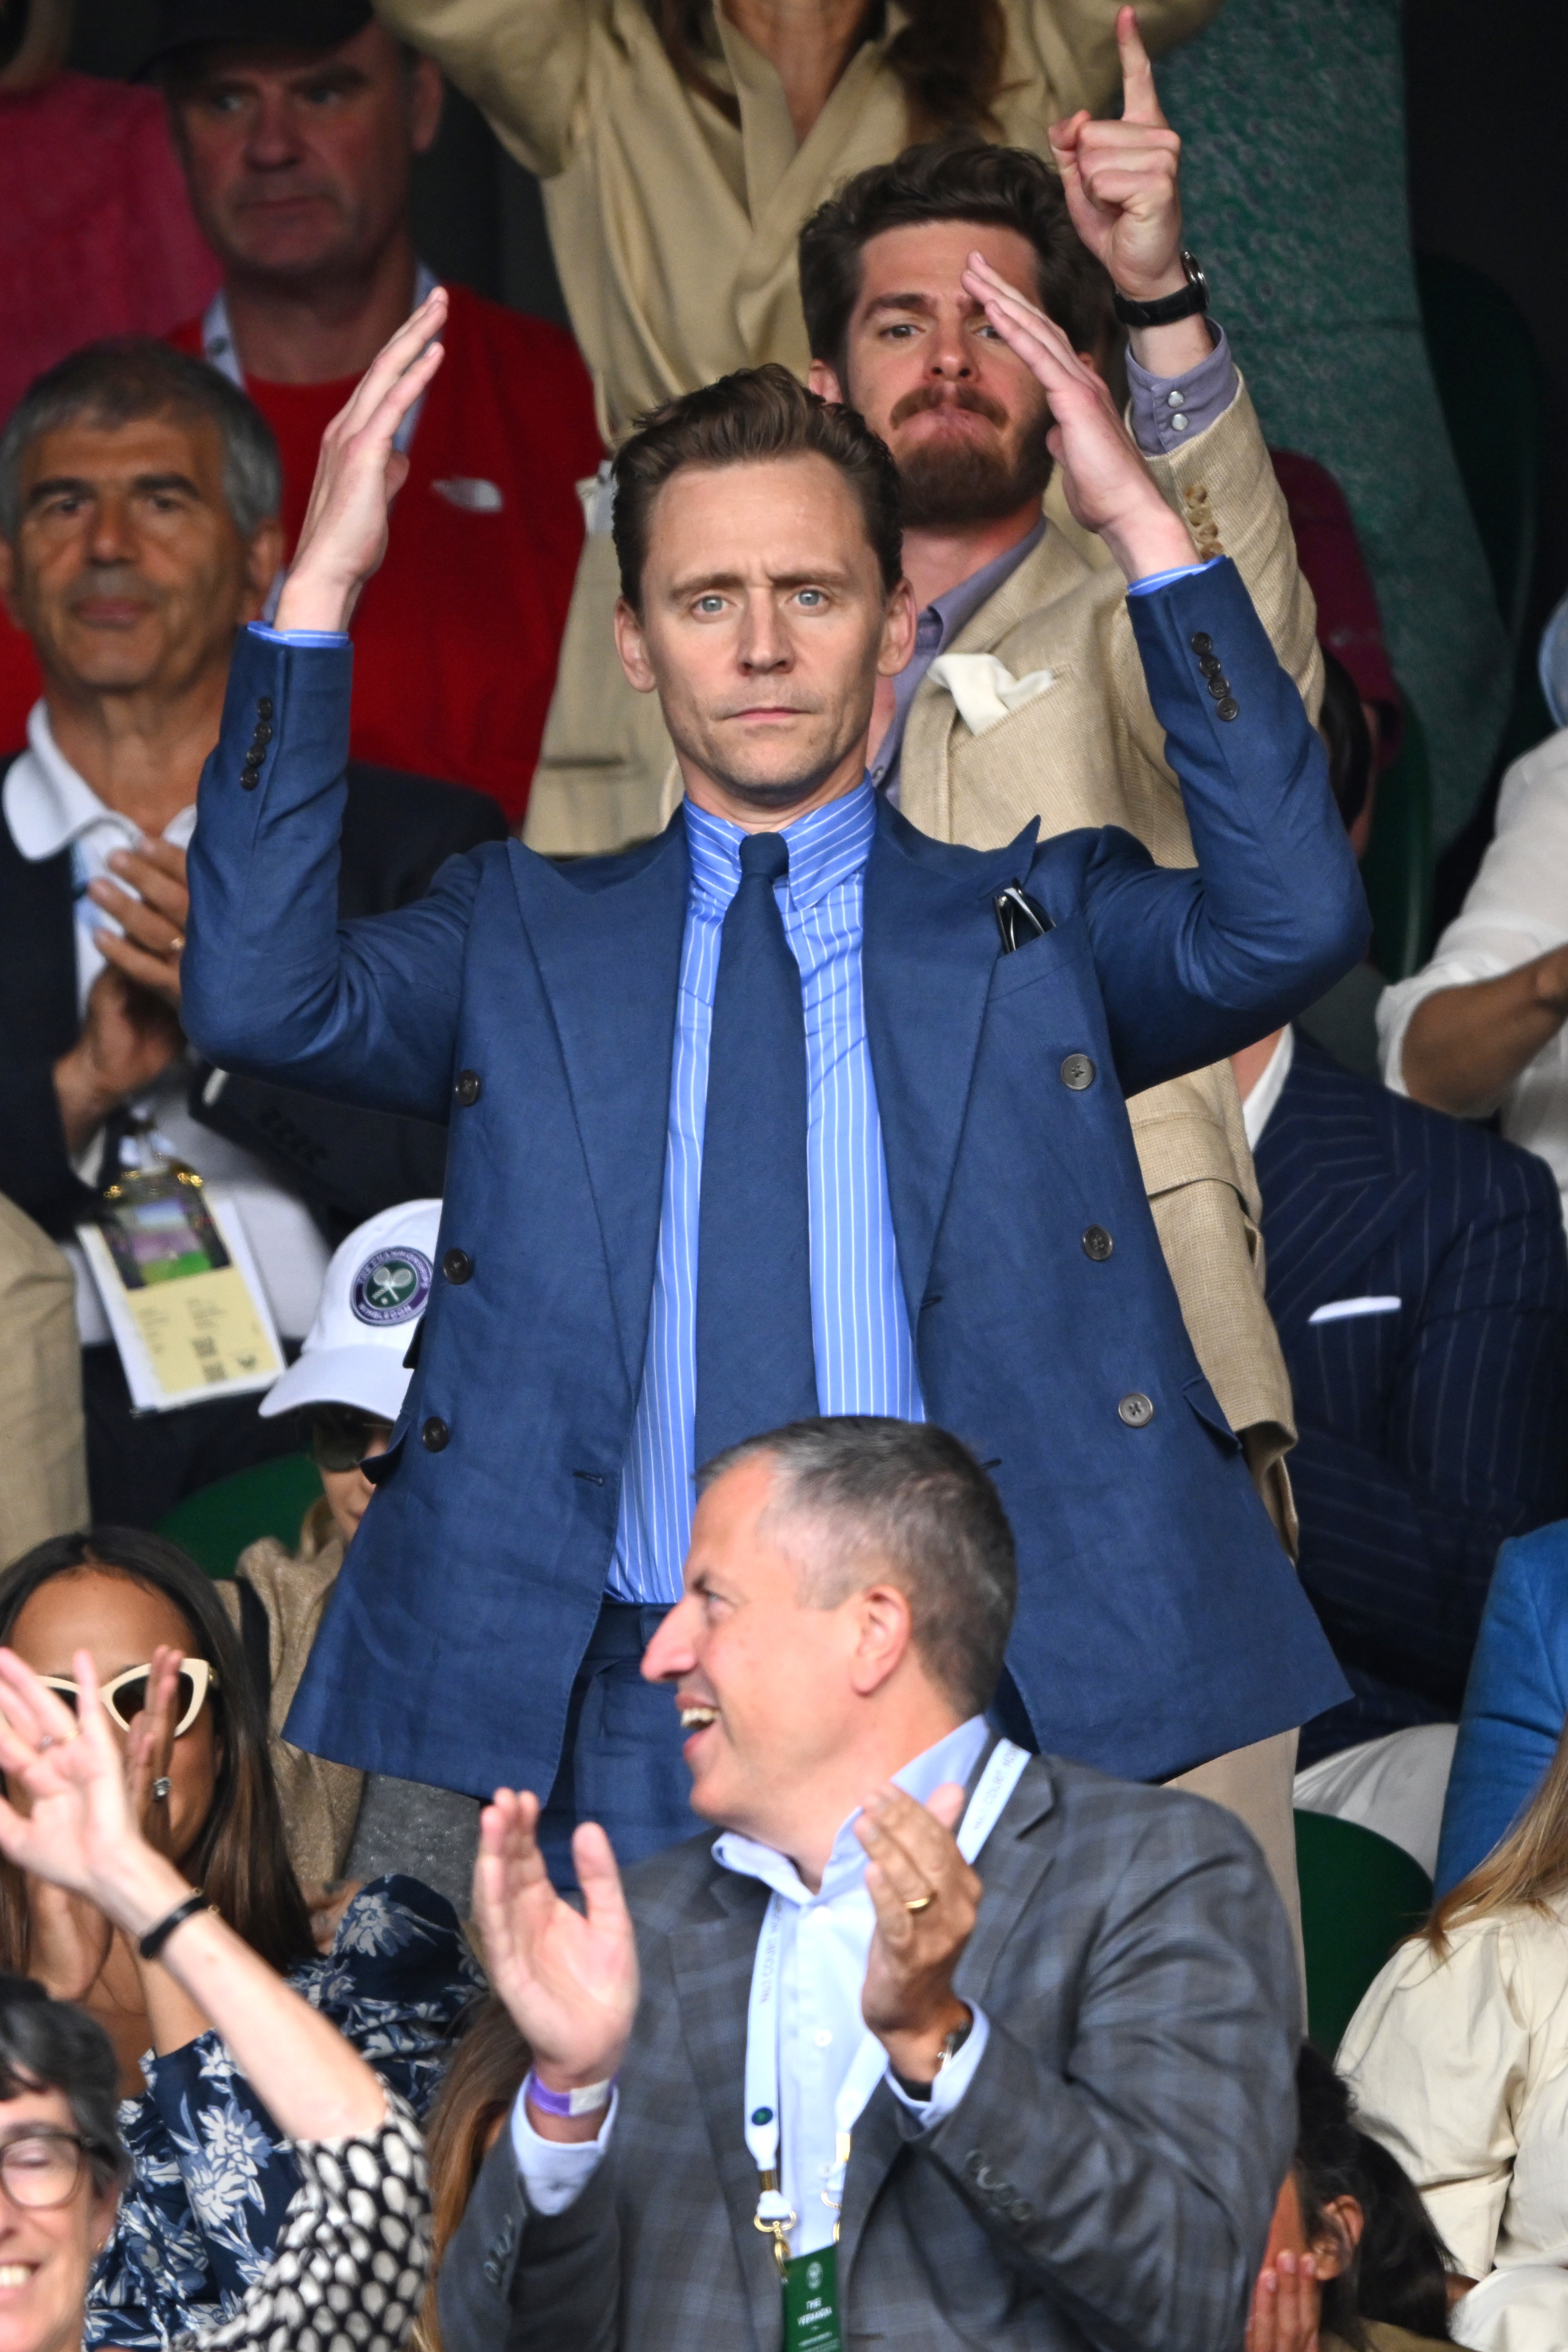 Tom standing with his arms raised